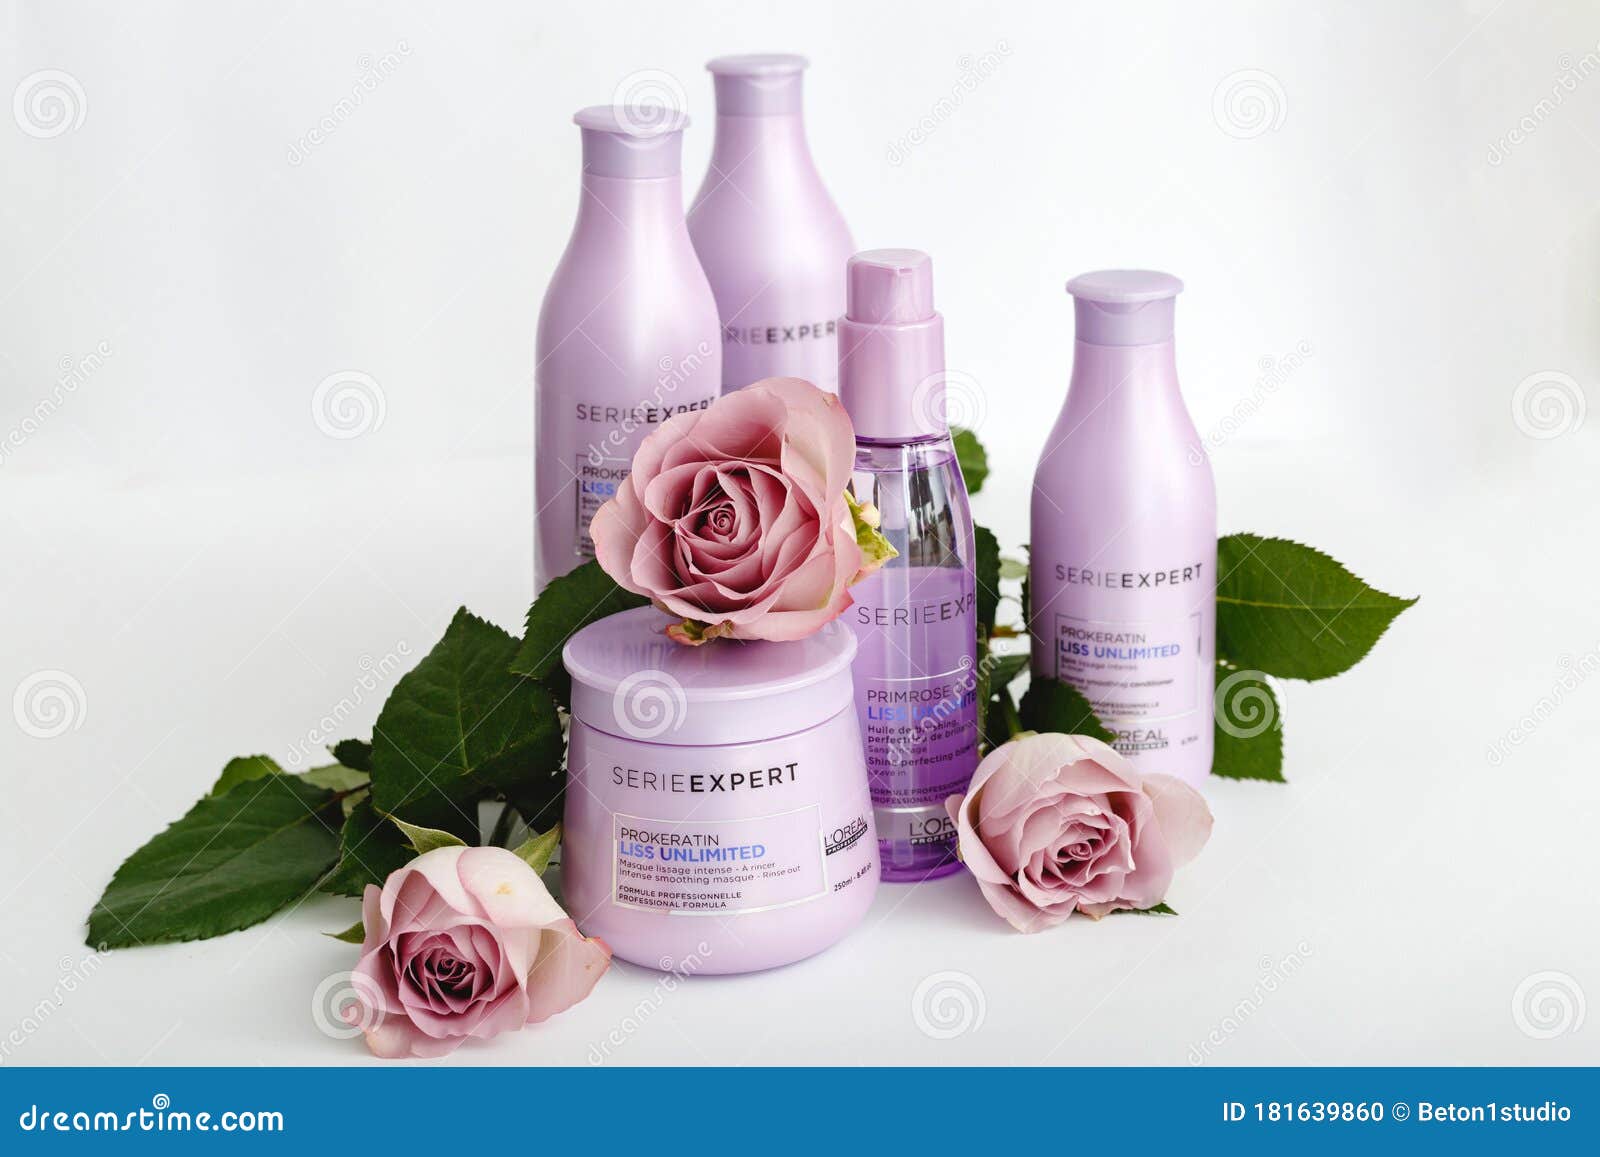 Hair Cosmetics Hair Shampoo Beauty Products For Beauty Salon With Flower On White Background L Oreal Professionnel Serie Exper Editorial Image Image Of Light Blank 181639860